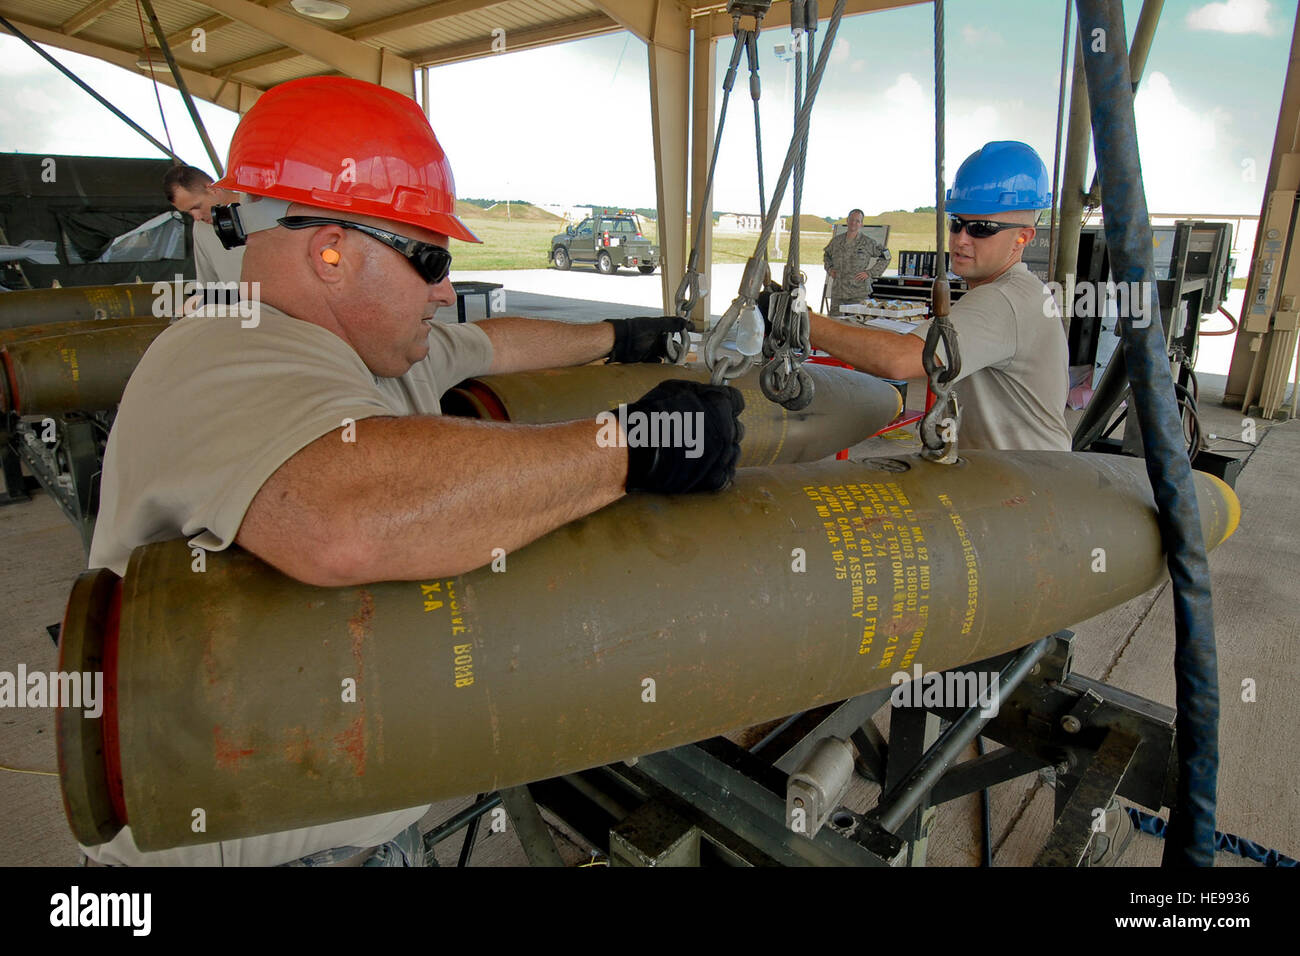 Master  Sergeant Tommy Nash (left) and Staff Sergeant Adam Gilbert of the Ammo Build Crew from the 169th Fighter Wing, McEntire Joint National Guard Base, South Carolina, lift unassembled Mark 82 (Mk-82) bomb components from a Munitions Assembly Conveyor (MAC) at Shaw AFB.  The Mark 82's were built to use in future live fire exercises. The McEntire crew, comprised of Guardsmen and Active-Associate Airmen, spent 3-days at Shaw building the bombs. (USAF  MSgt. Marvin R. Preston, 169th FW/PA) Stock Photo